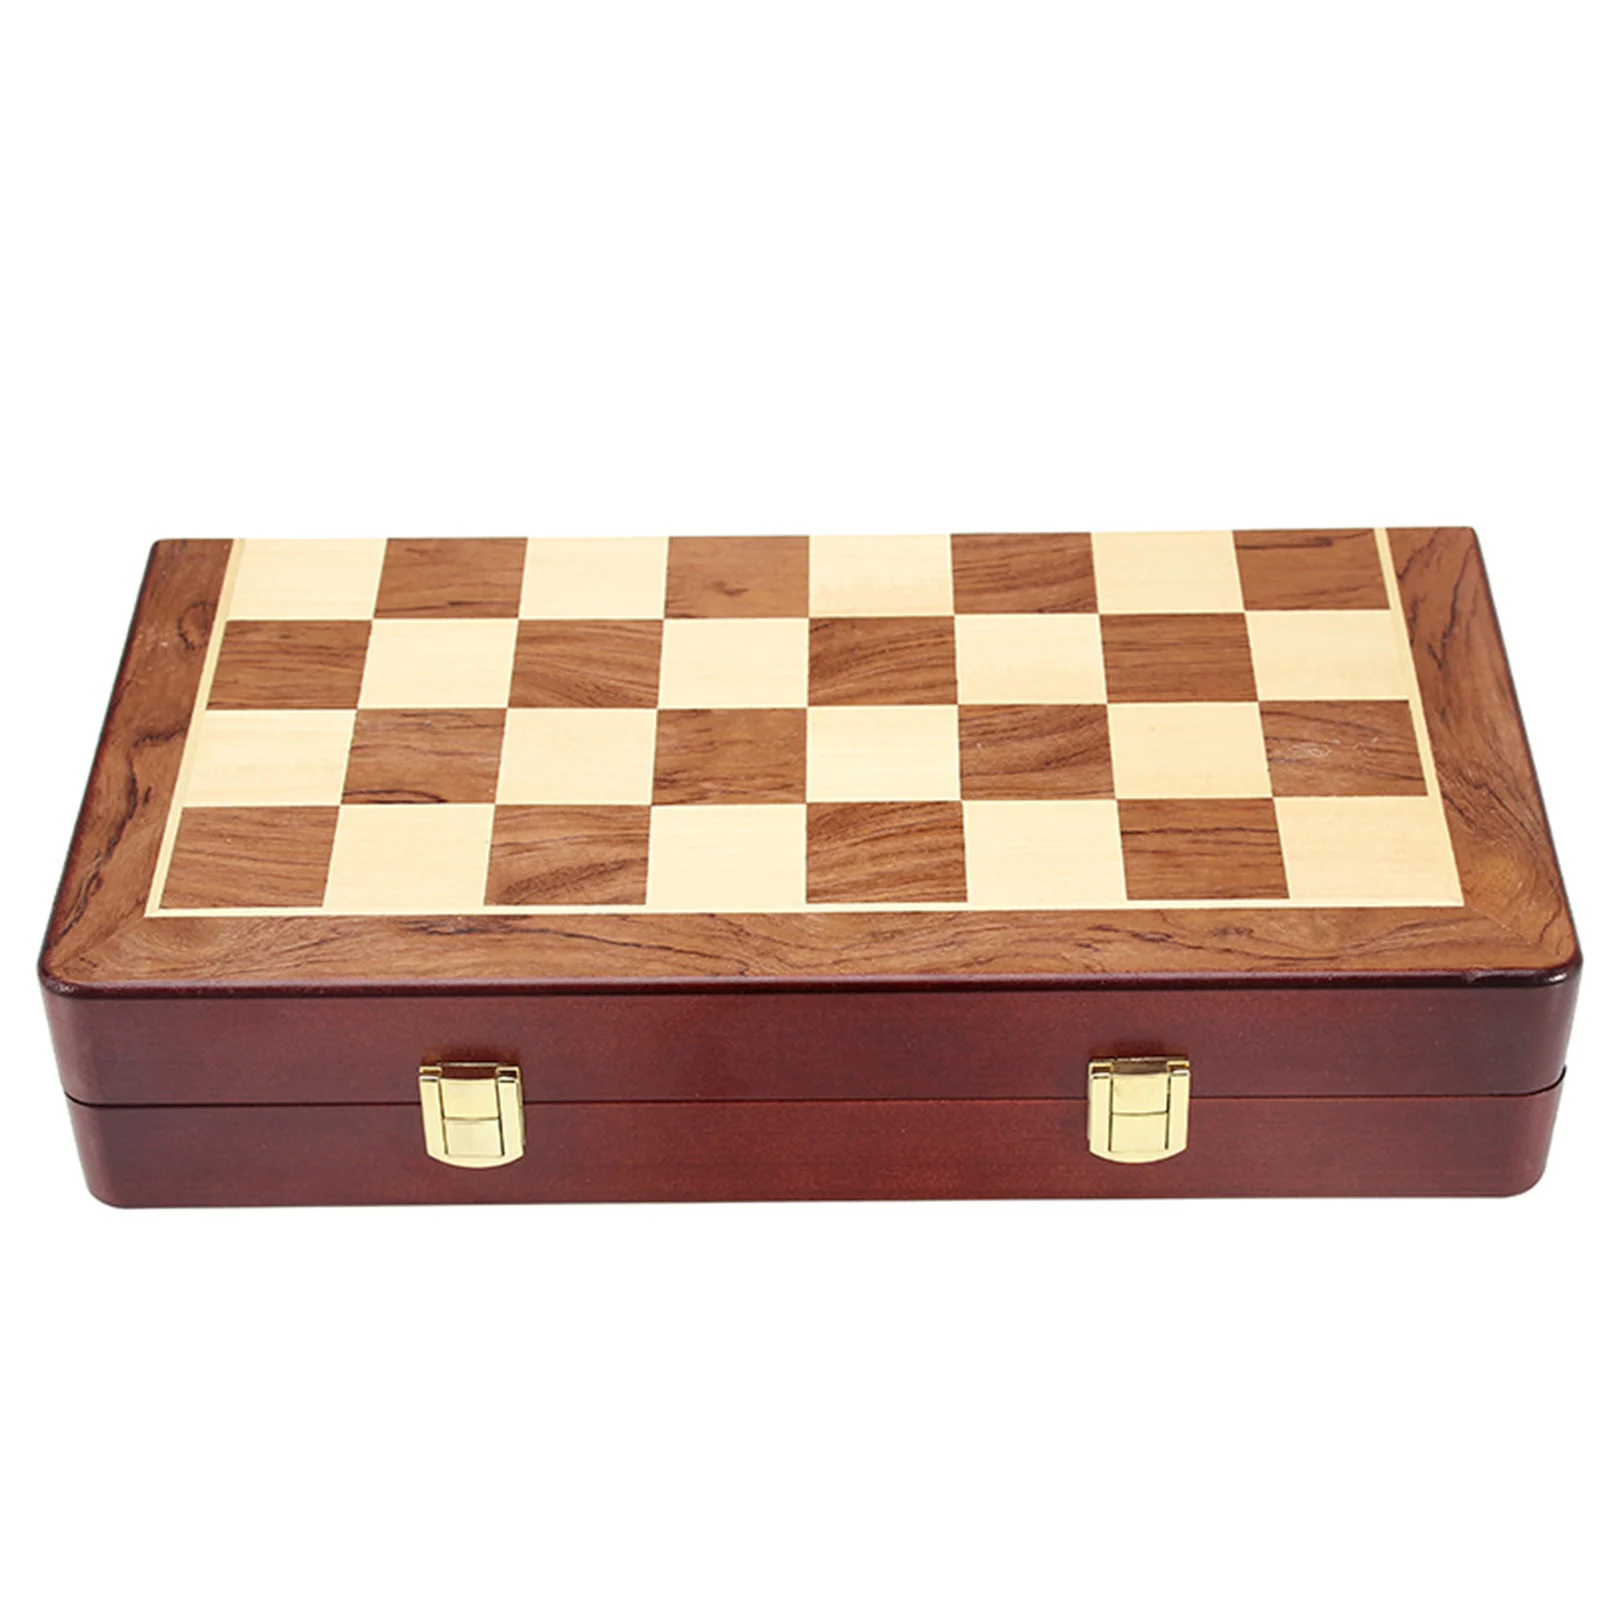 Buy Online Best Quality Metal Chess Set Folding Wooden Chess Board Handcrafted Chess Pieces Table Game Portable Travel Chess Board Game Sets 12 Inches